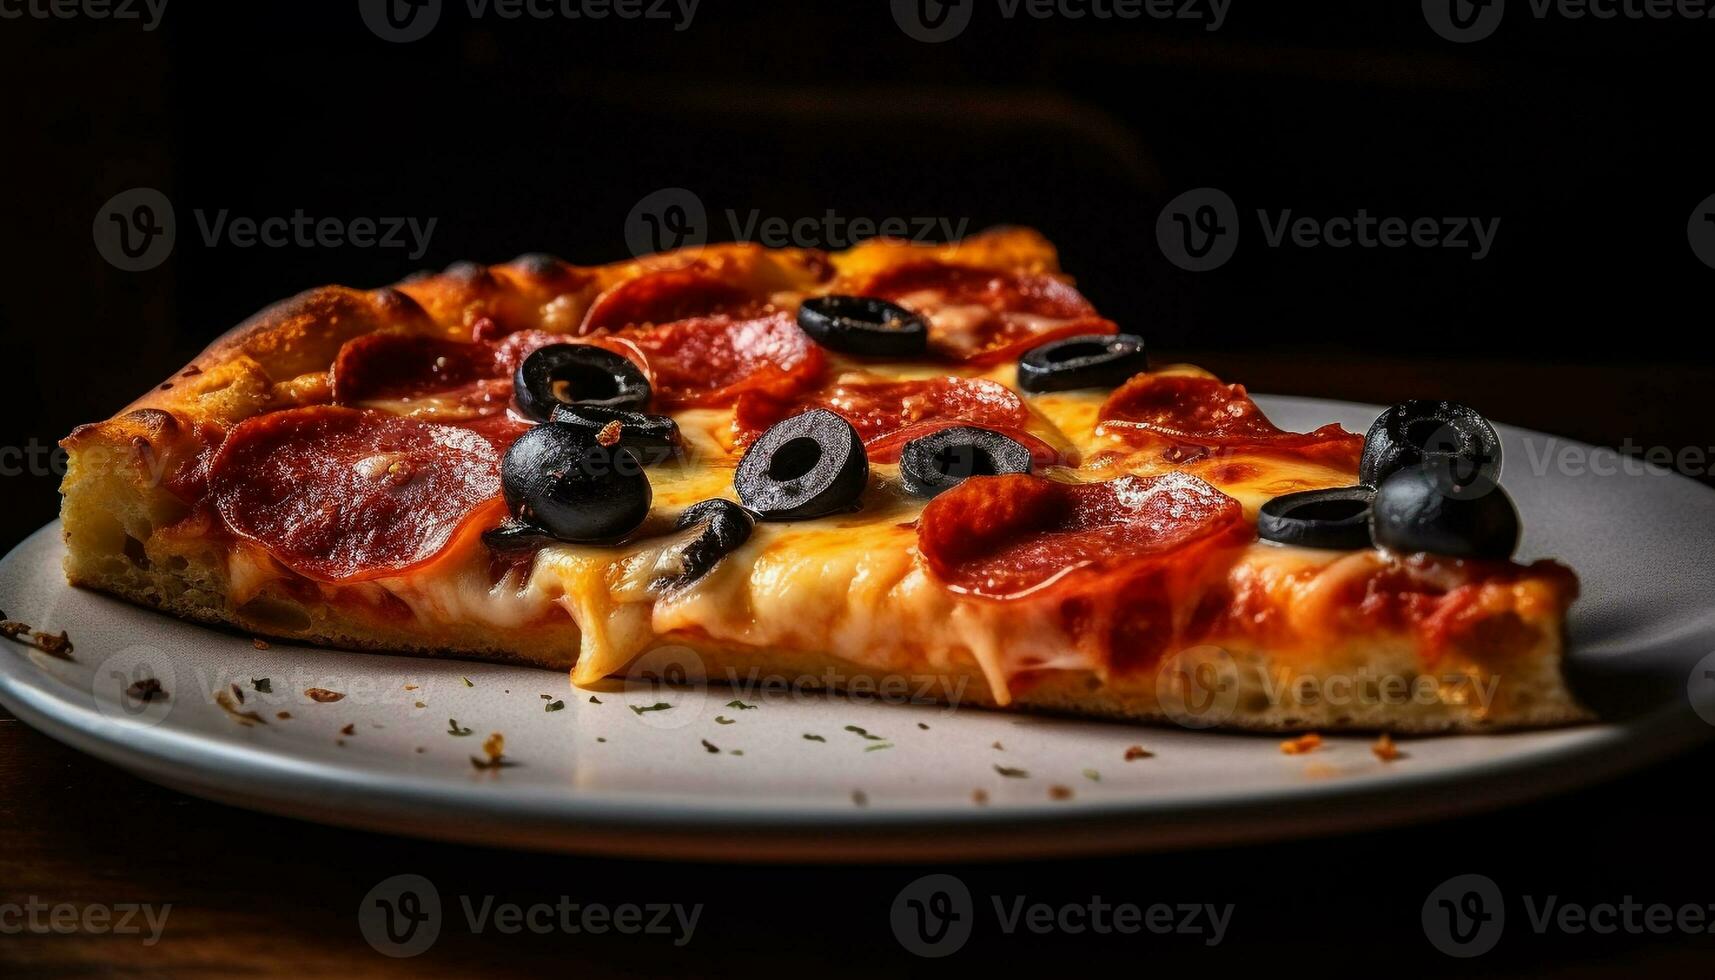 A fresh, homemade pizza baked with mozzarella generated by AI photo